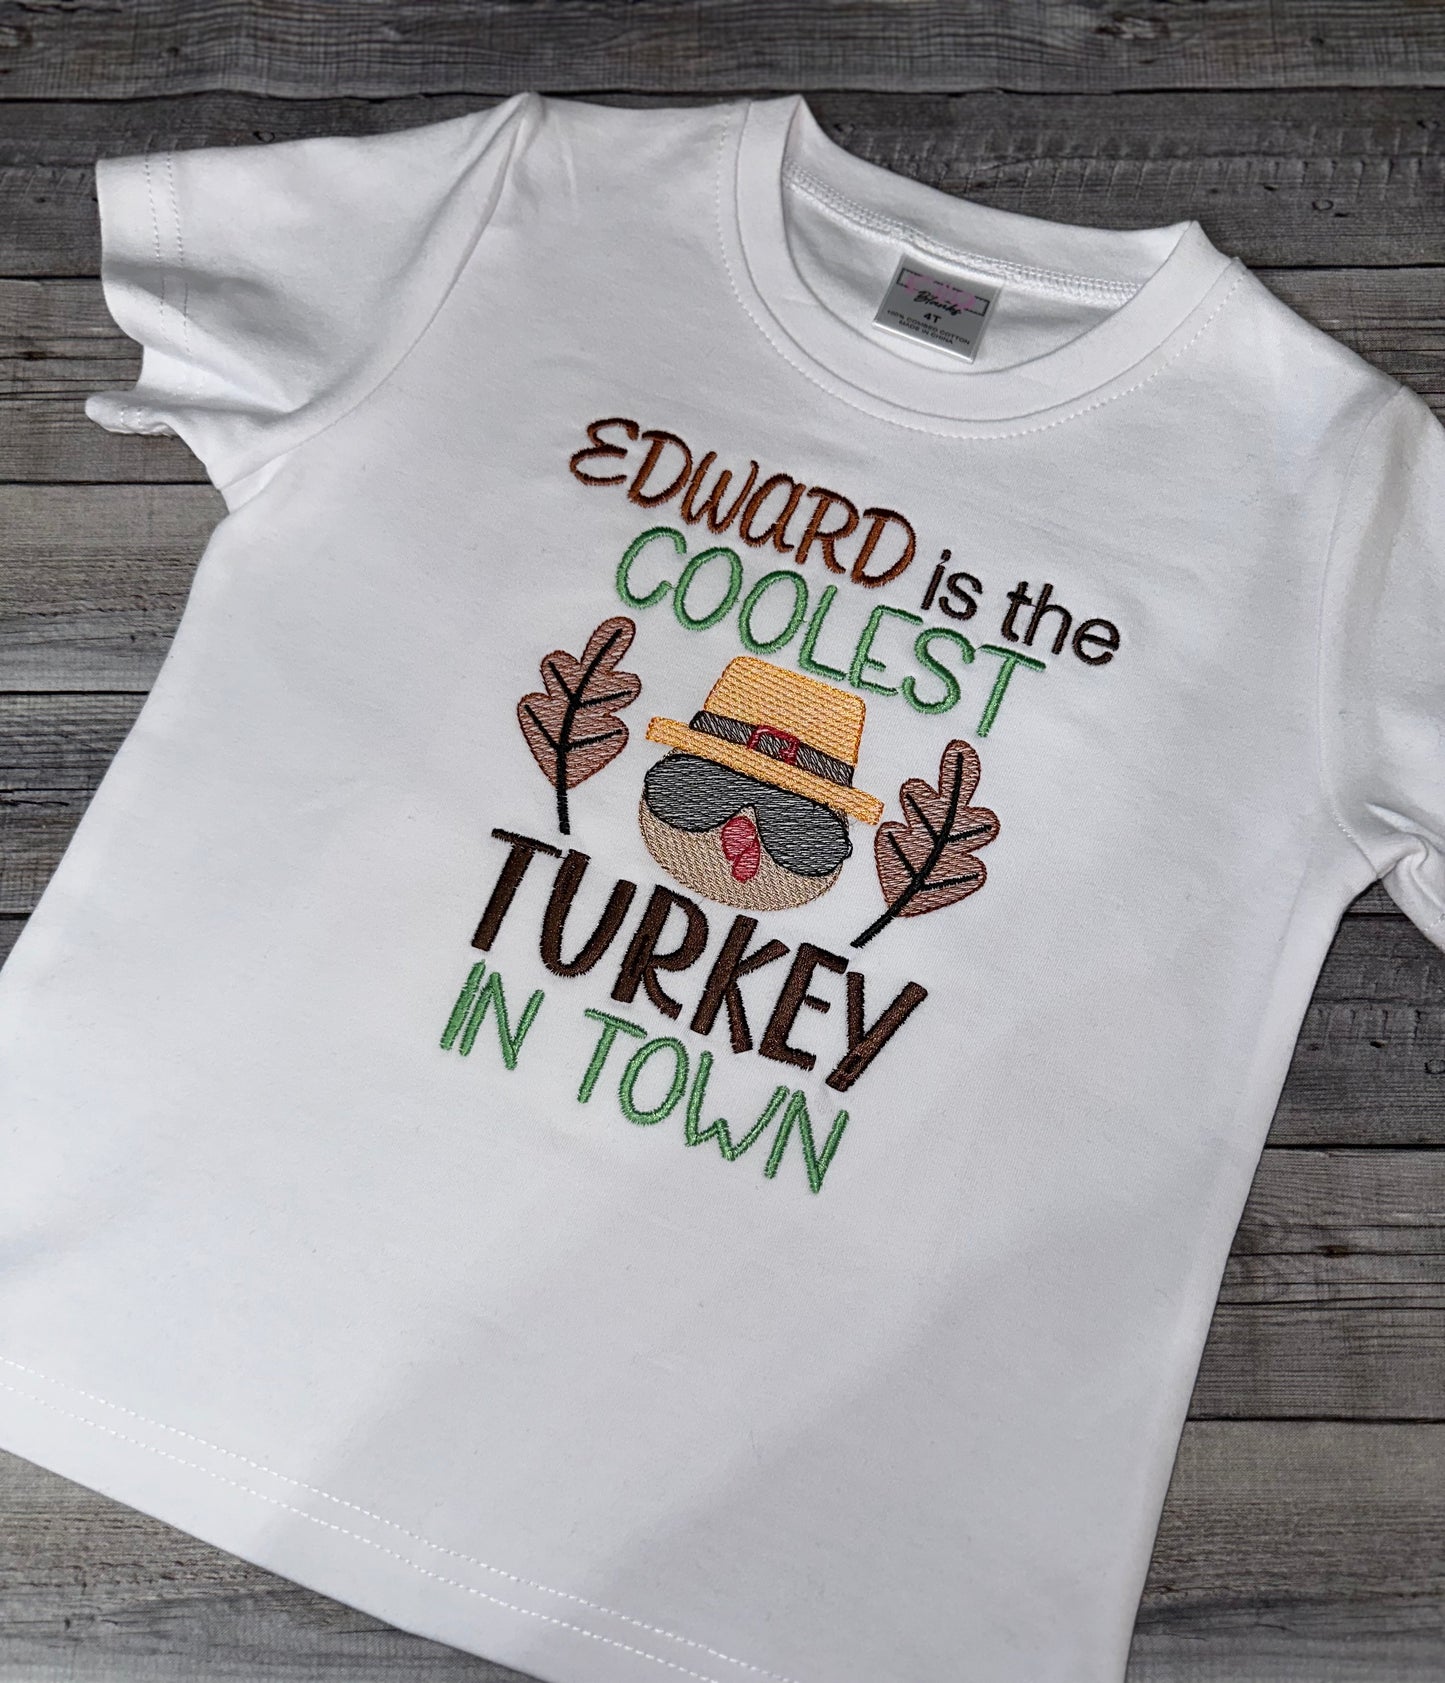 Coolest turkey in town shirt for boys- Thanksgiving Holiday shirt